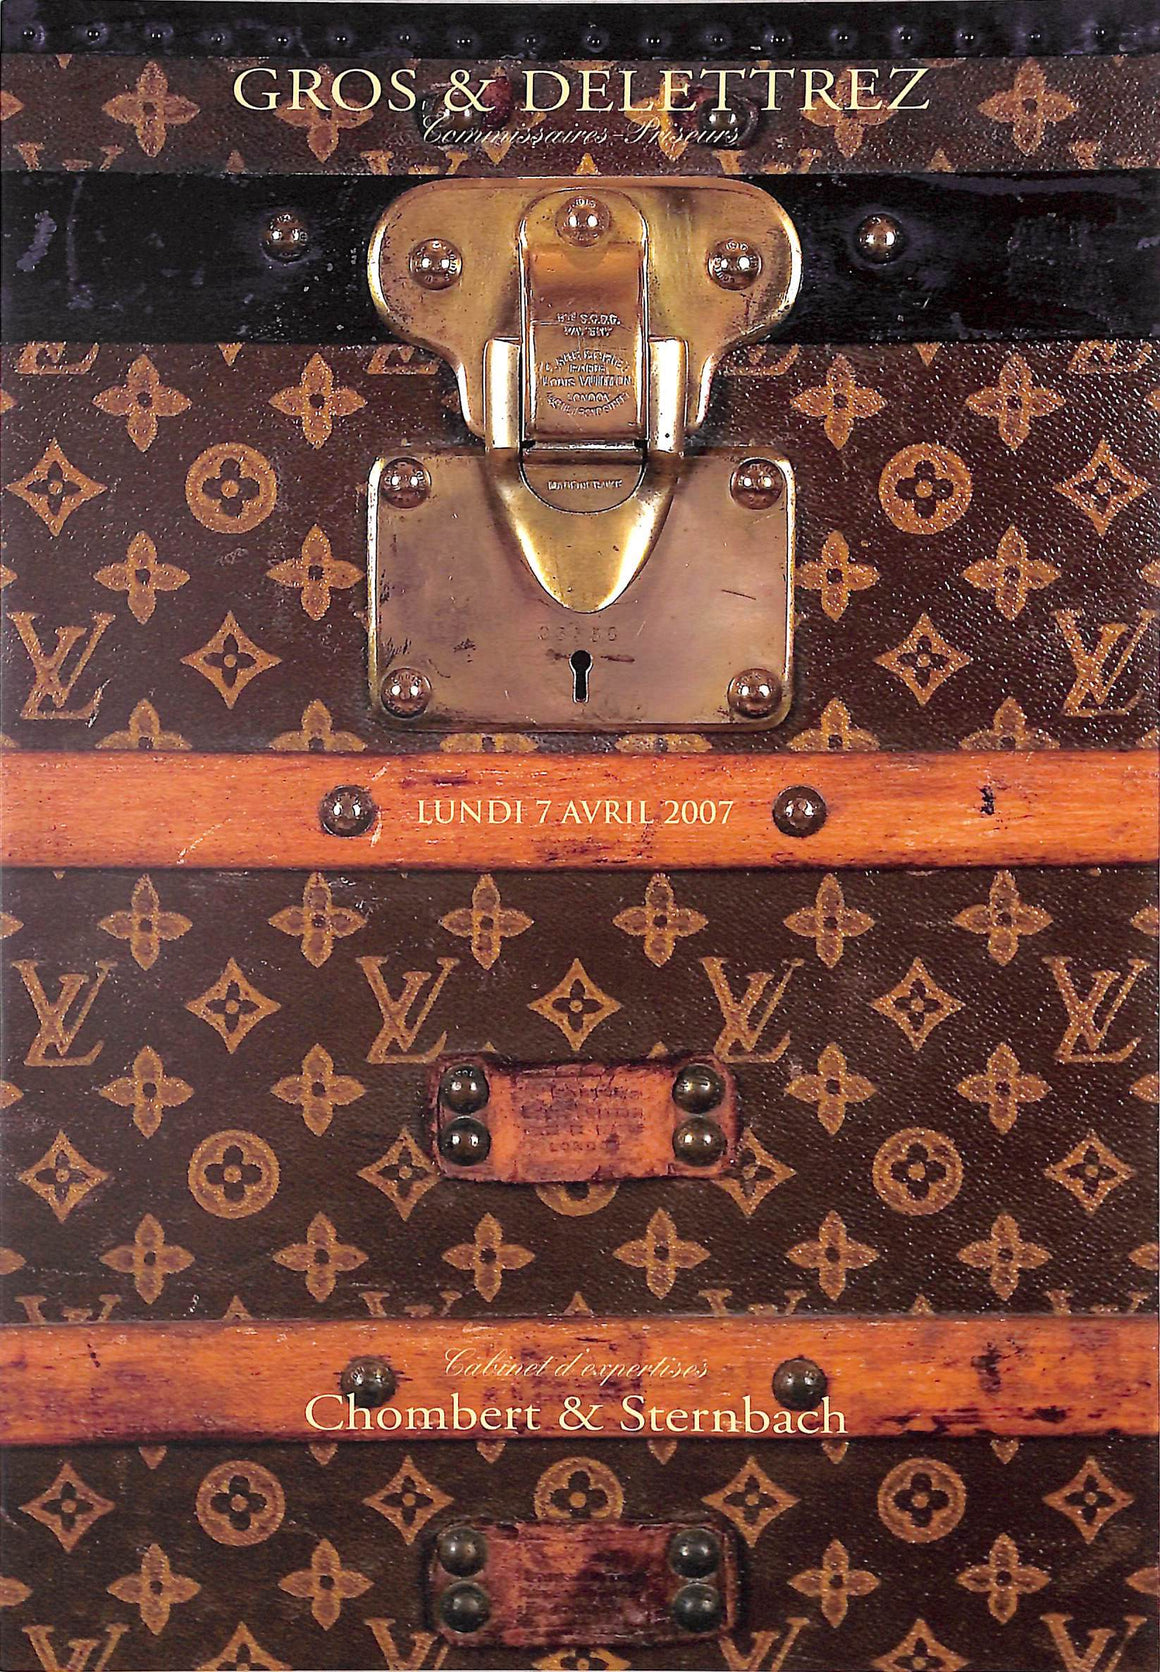 Visionaire Private Limited Edition Hardcover Book in Louis Vuitton